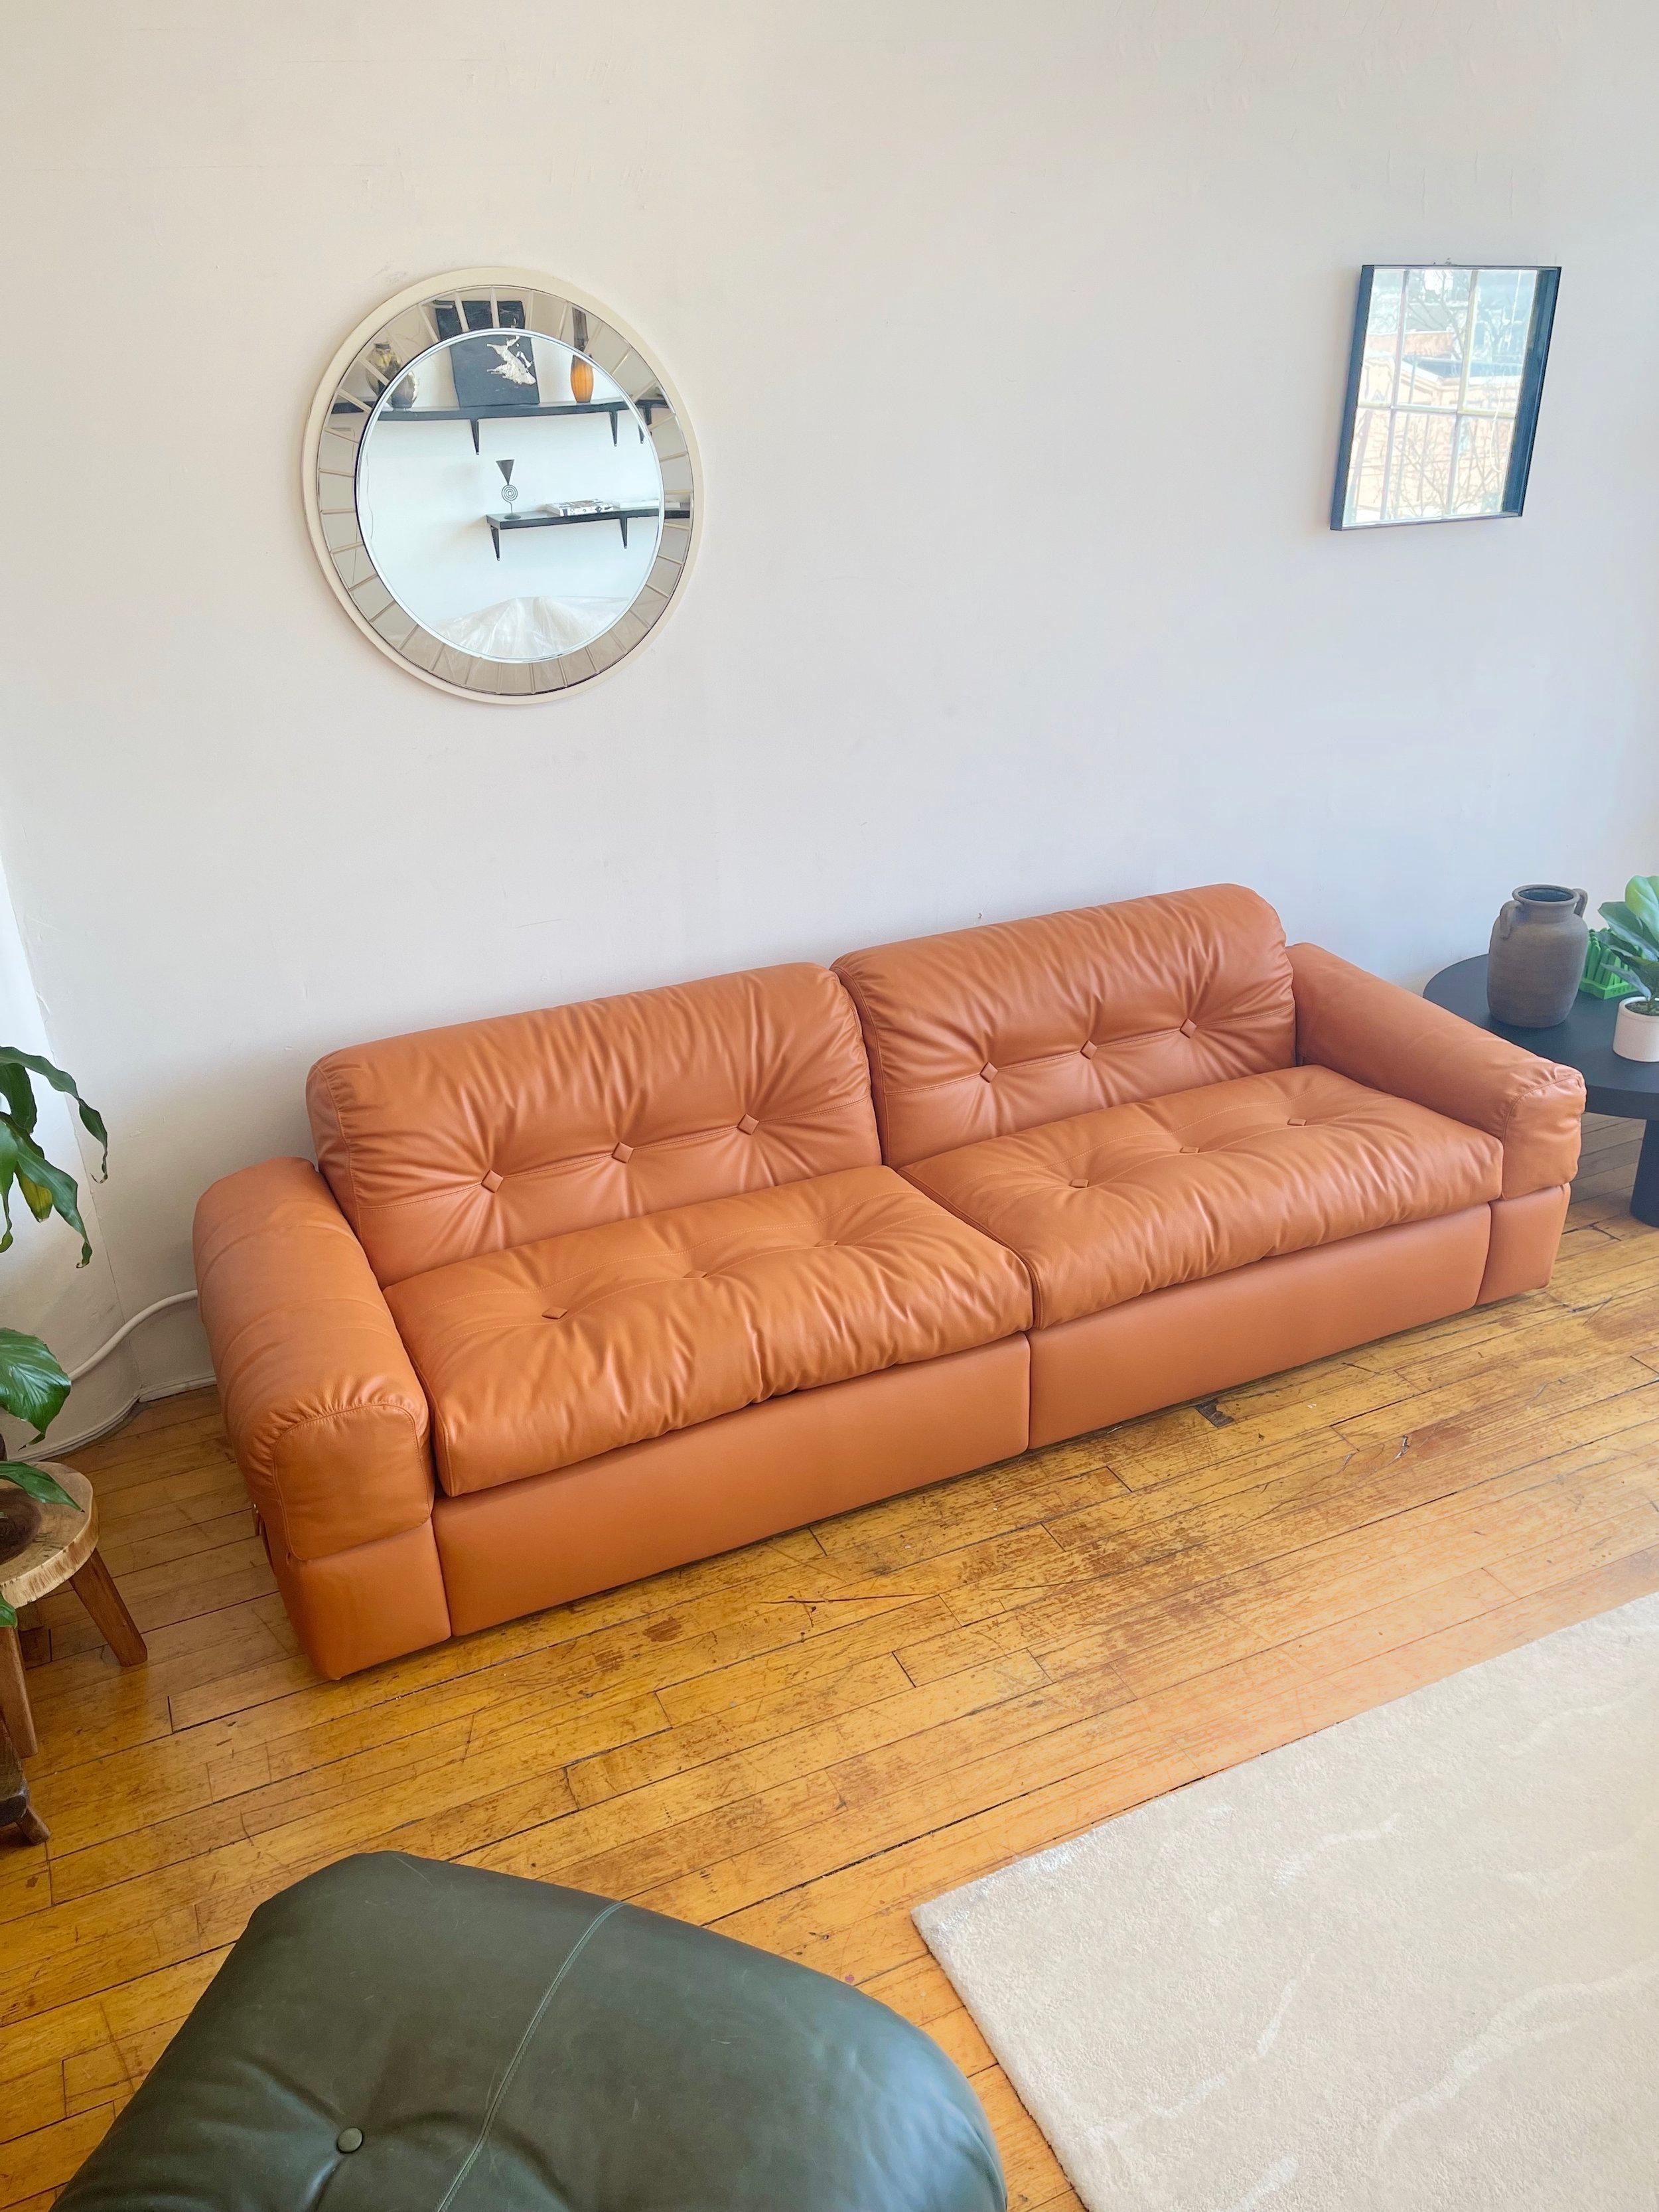 Introducing this stunning vintage Italian Leather Sofa by Adriano Piazzesi, a rare vintage Italian piece that showcases iconic design and timeless appeal. This exceptional vintage leather sofa, sourced from Italy and originating from the 1970s, has